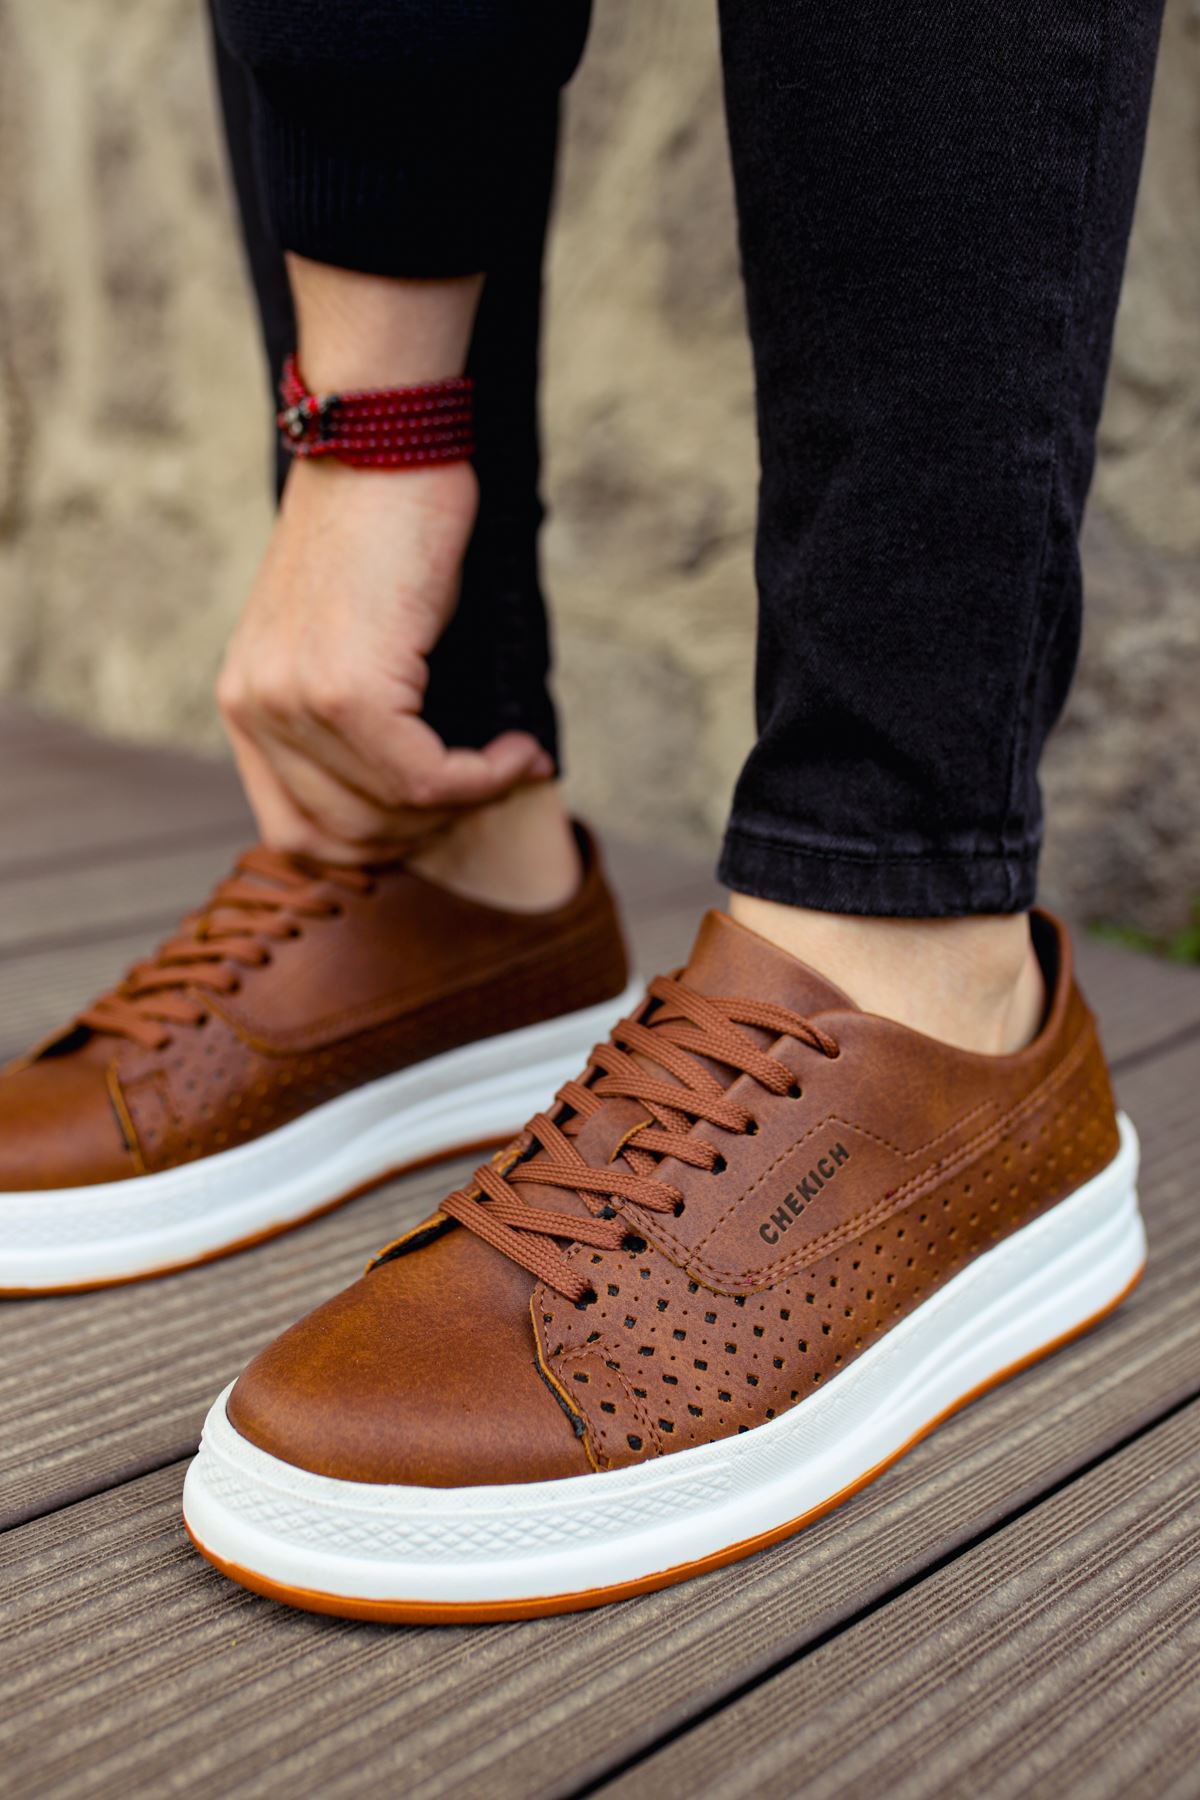 CH043 Men's Unisex Brown-White Sole Casual Shoes - STREETMODE™